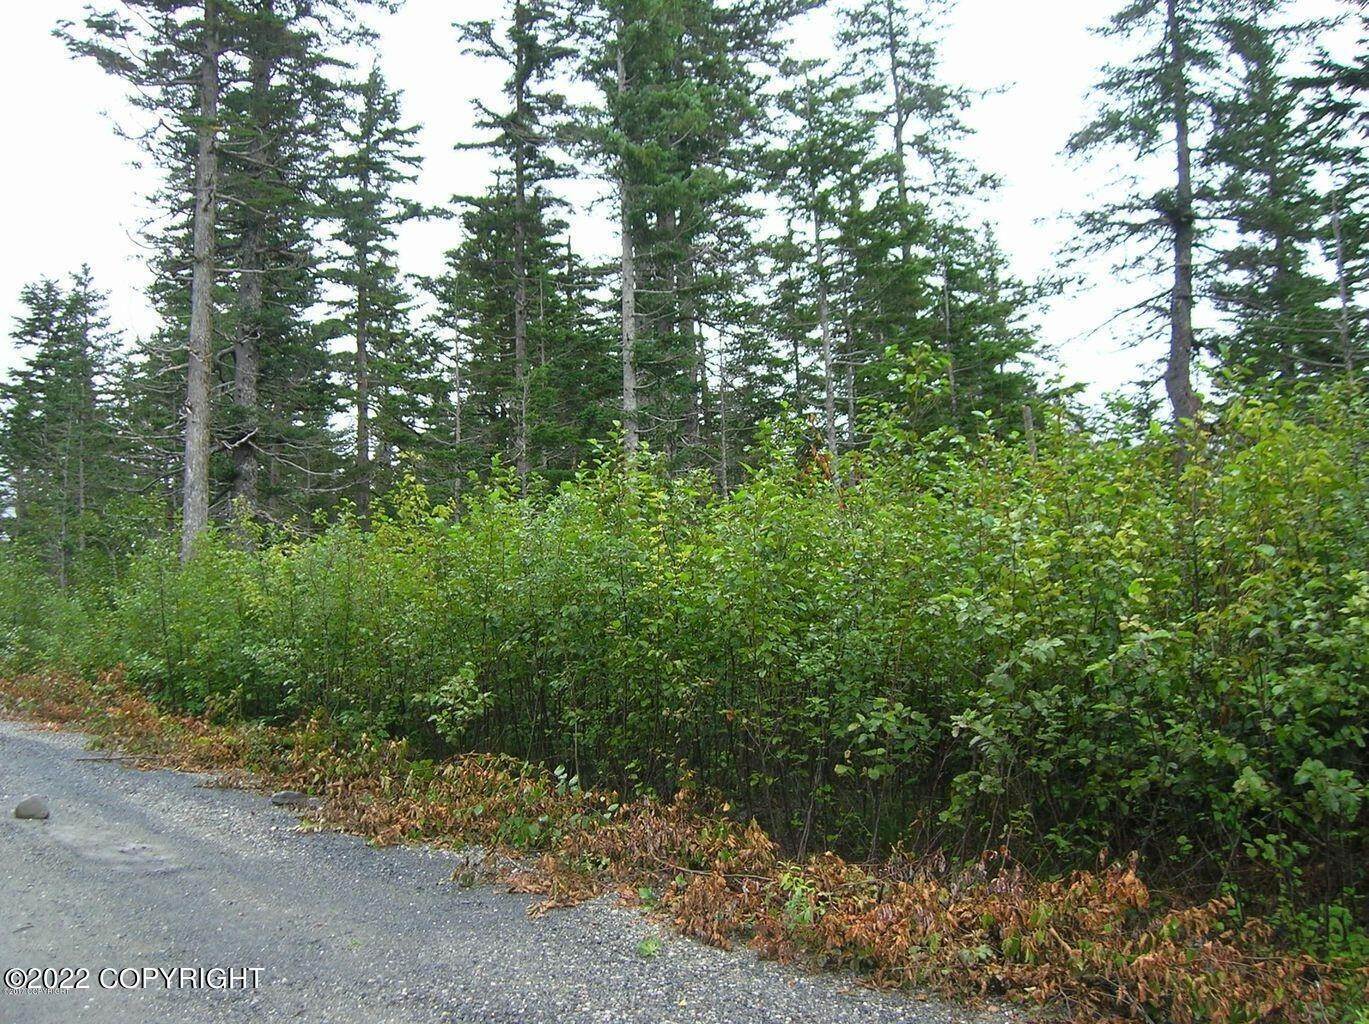 4. Land for Sale at L1 B13 Cove Creek Road Whittier, Alaska 99693 United States